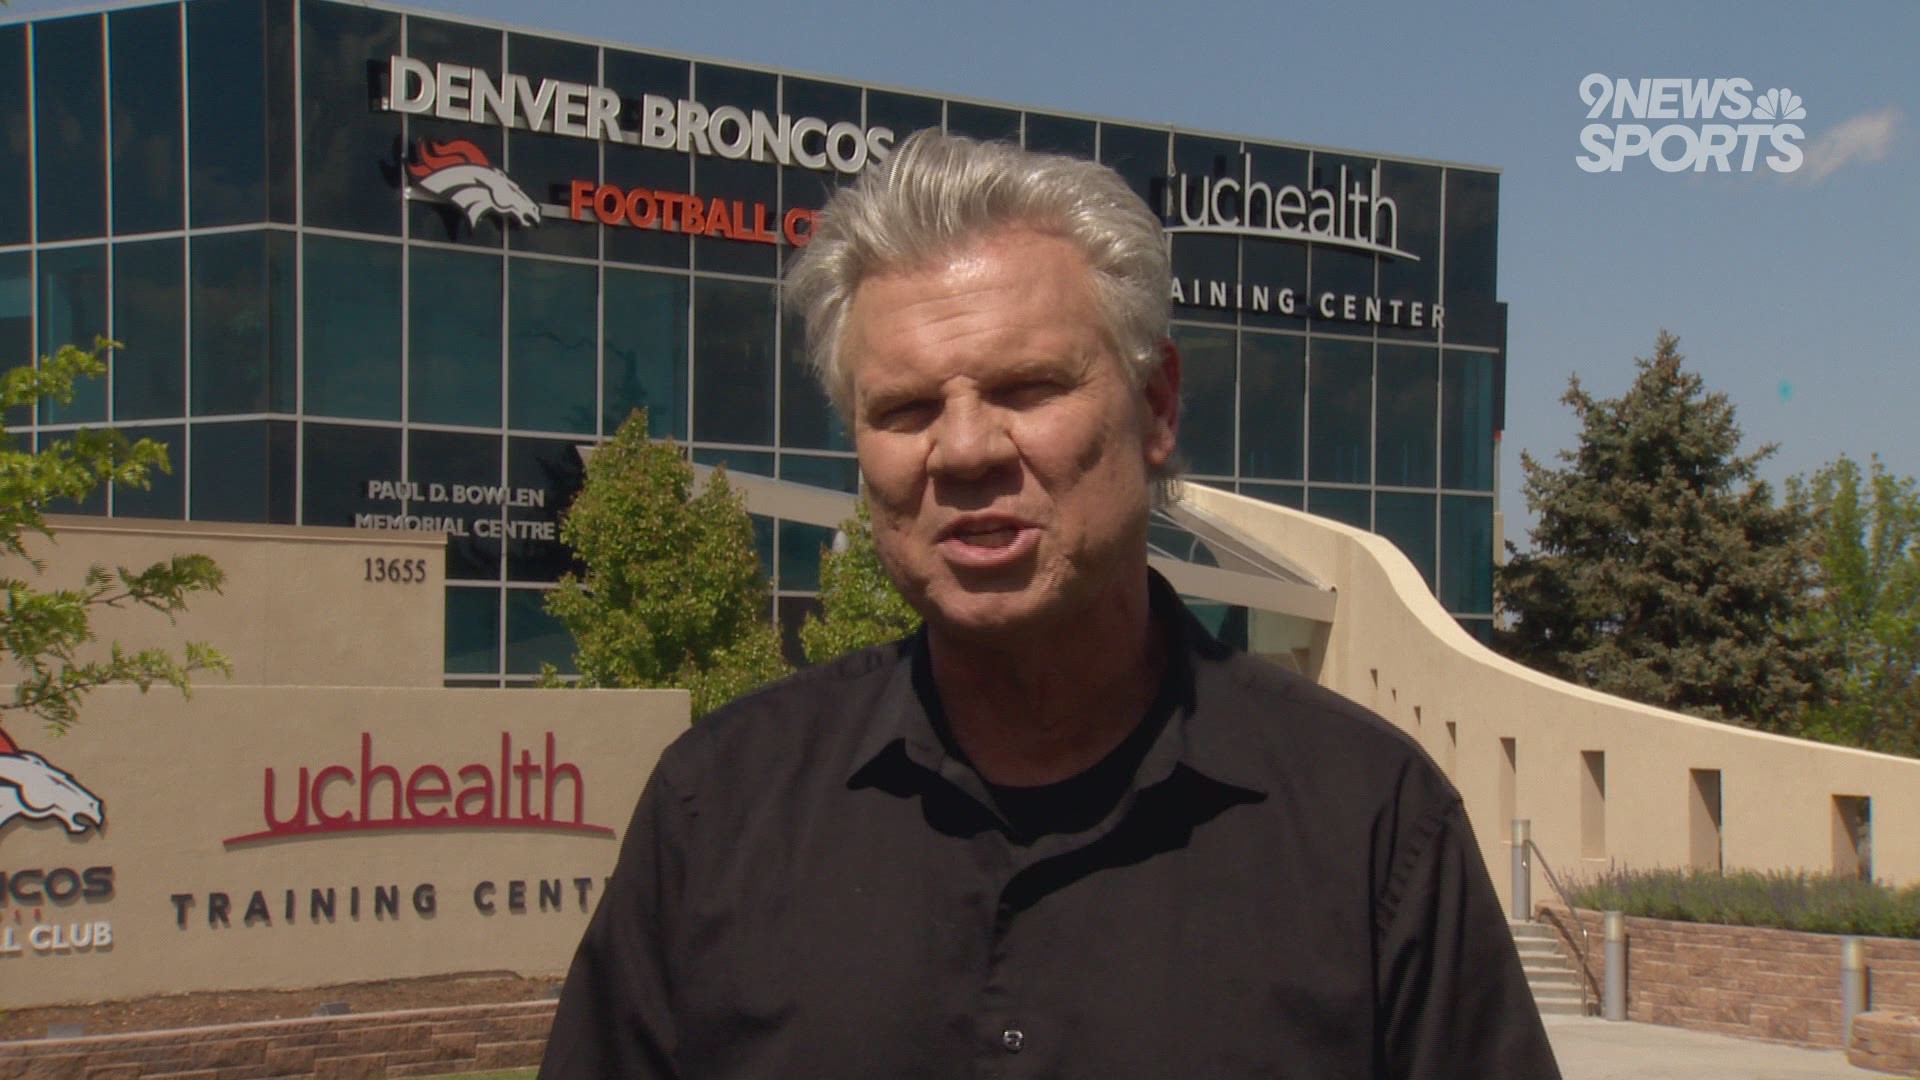 Former Broncos QB says he will attend Hall of Fame inductions for Pat Bowlen and Champ Bailey.